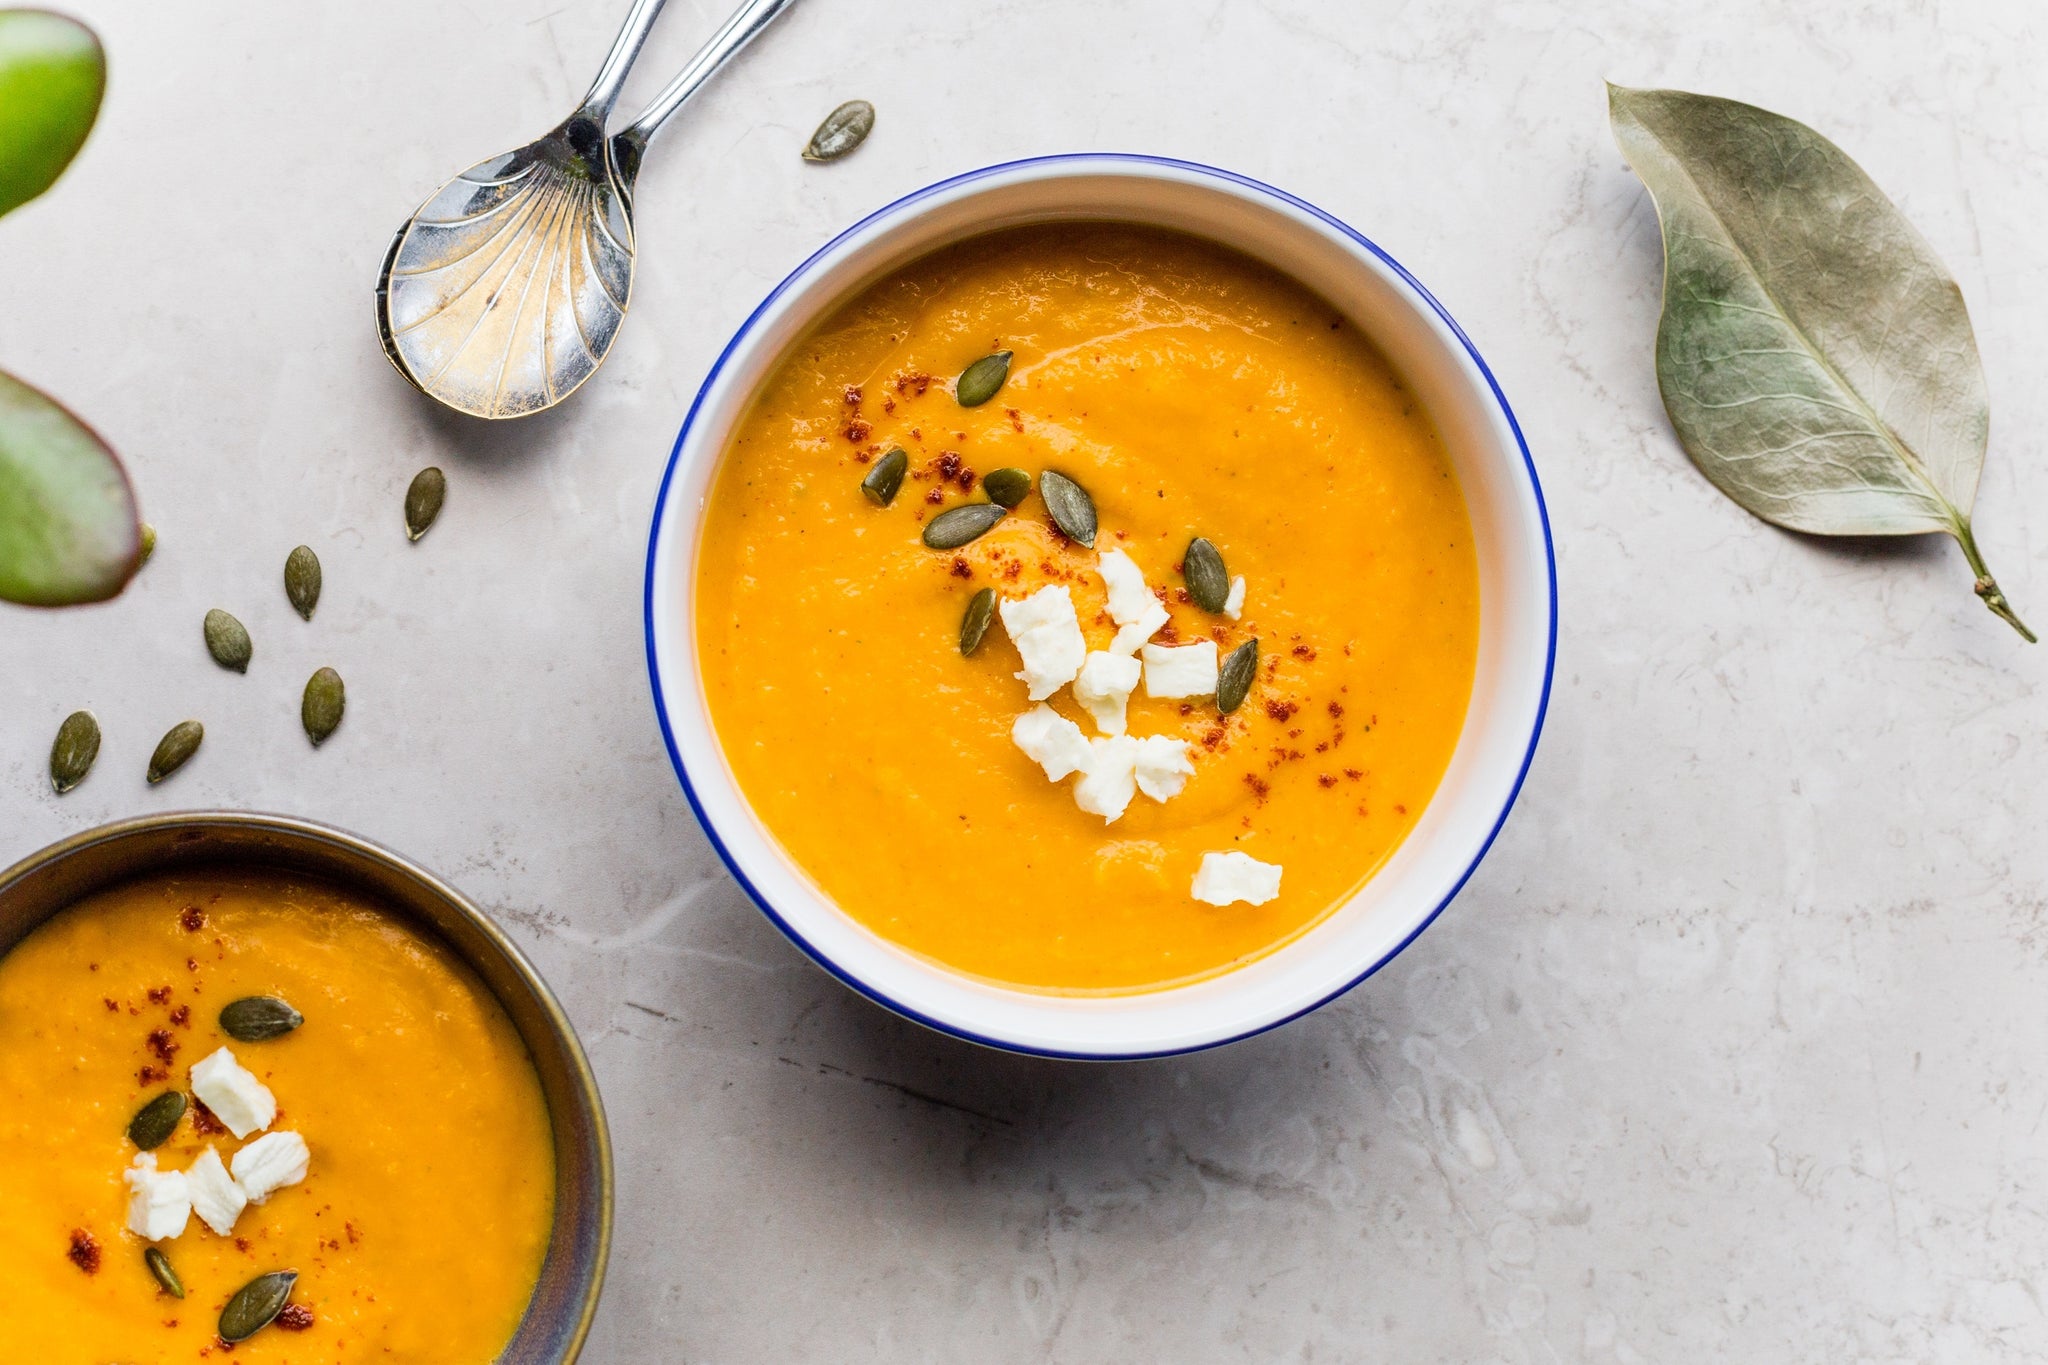 Soups can contain a surprising amount of sugar